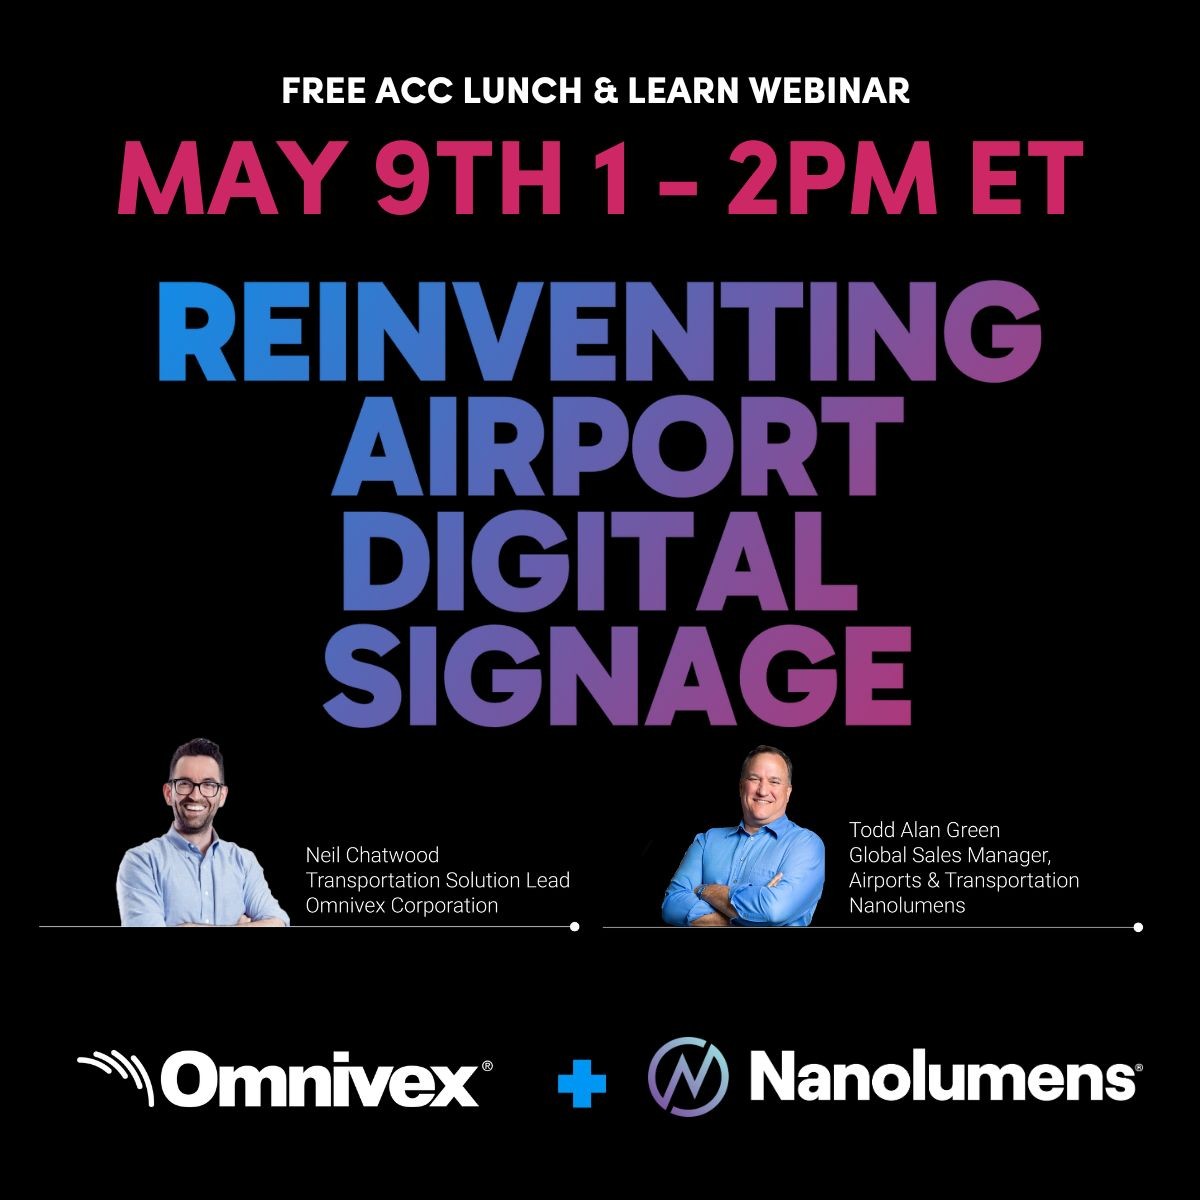 Join us for a insightful webinar alongside Onvivex, on May 9th at 1pm ET. We will chat about how to identify important considerations for selecting DVLED, how to apply best digital signage practices to future projects, and more! my.acconline.org/events/event-d…